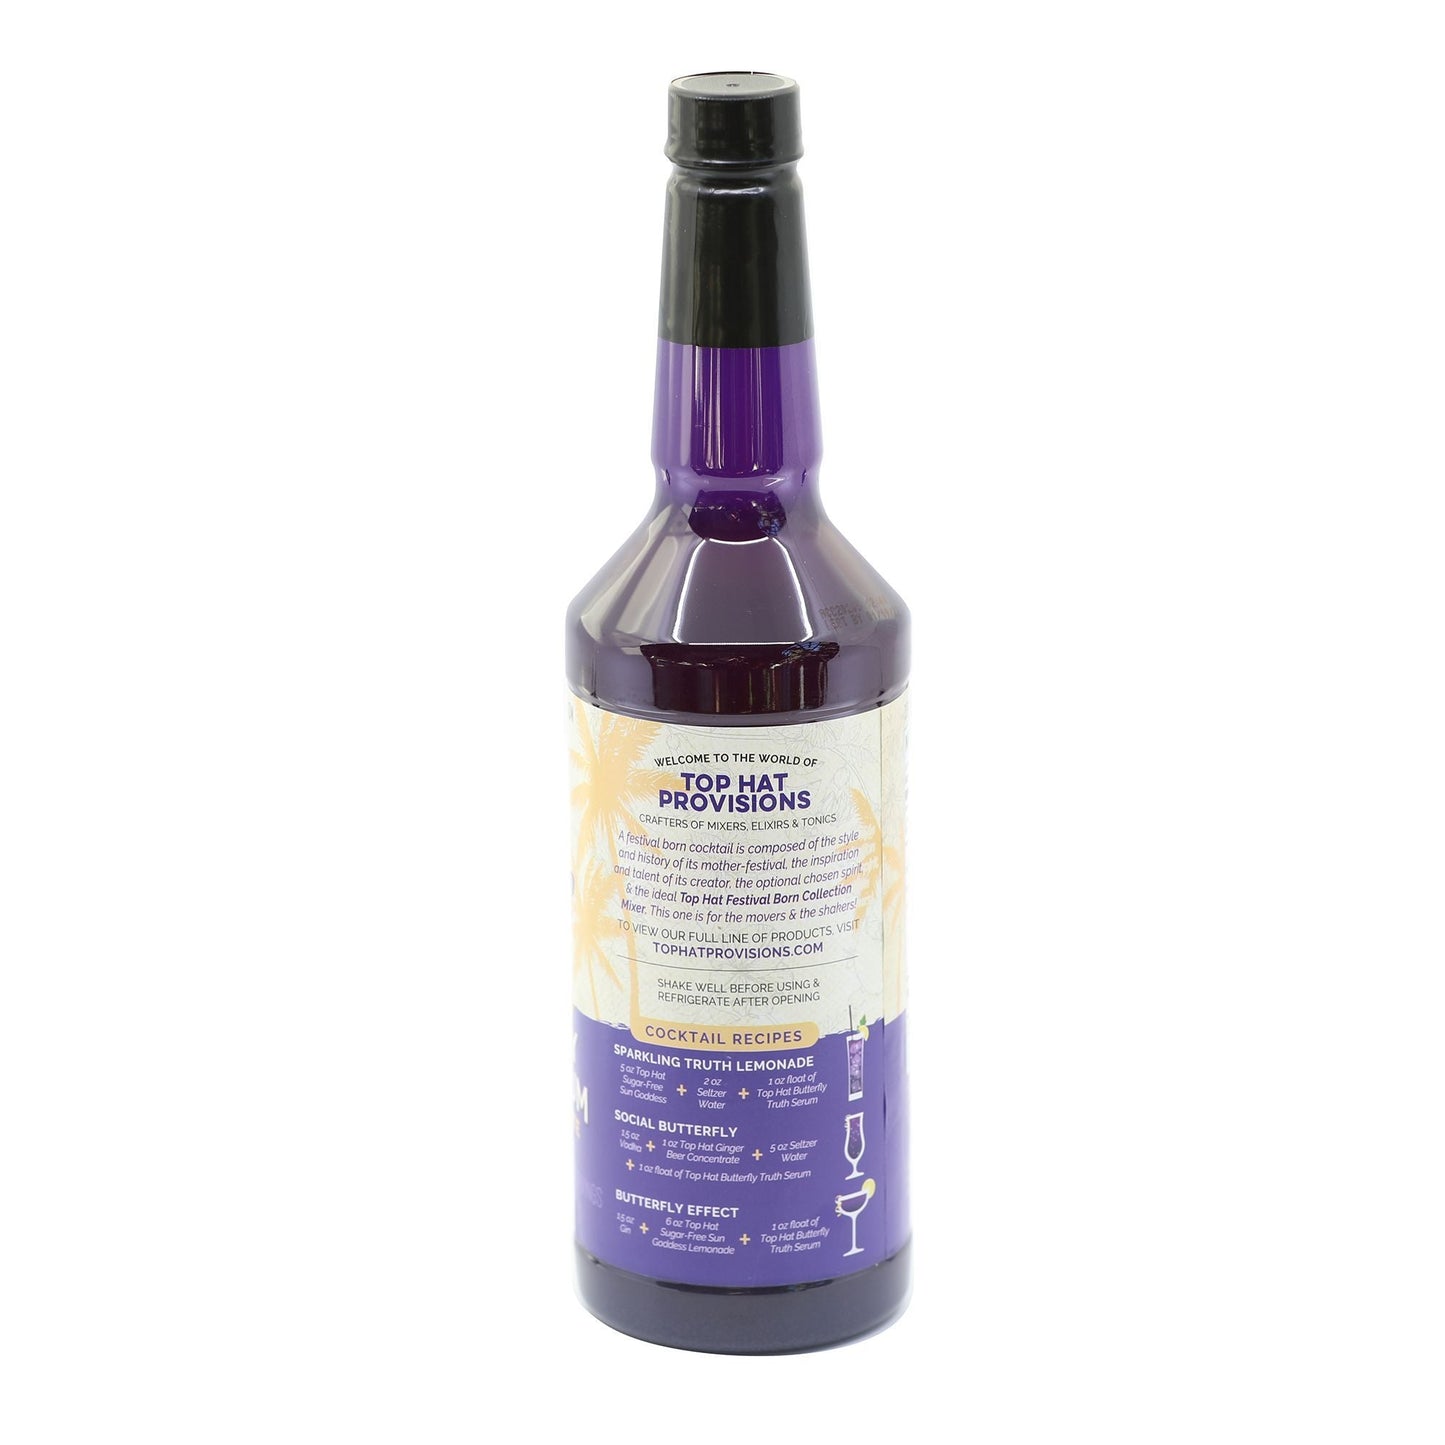 Top Hat Butterfly Truth Serum - Butterfly Pea Floral Extract - Blue Flower Tea Tincture - Alcohol Free Bitters - Unsweetened - Non-Alcoholic - Make Drinks Natural Blue and Indigo Purple - 12x32oz Case - Groove Rabbit